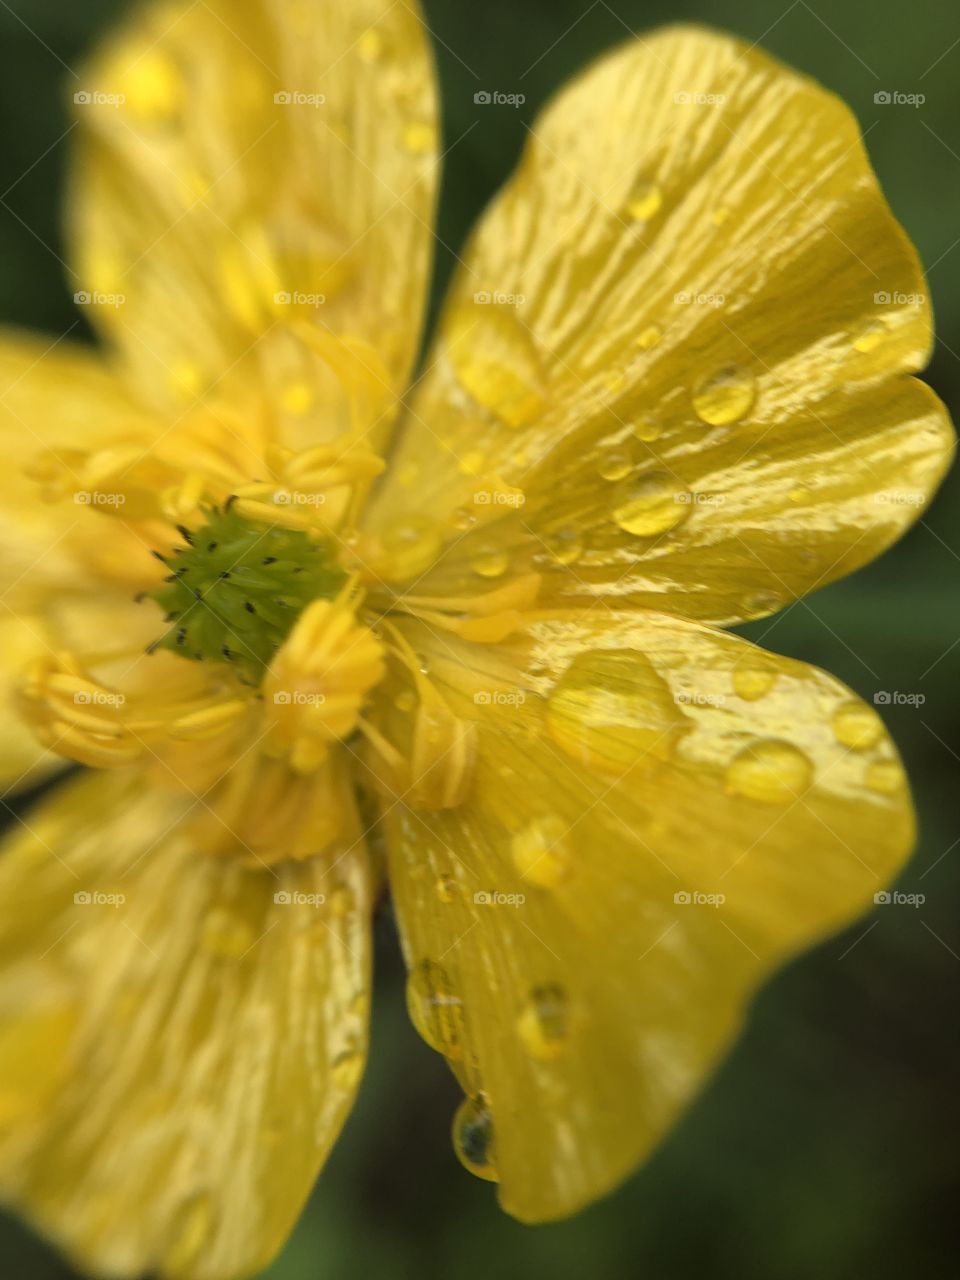 Small yellow after the rain